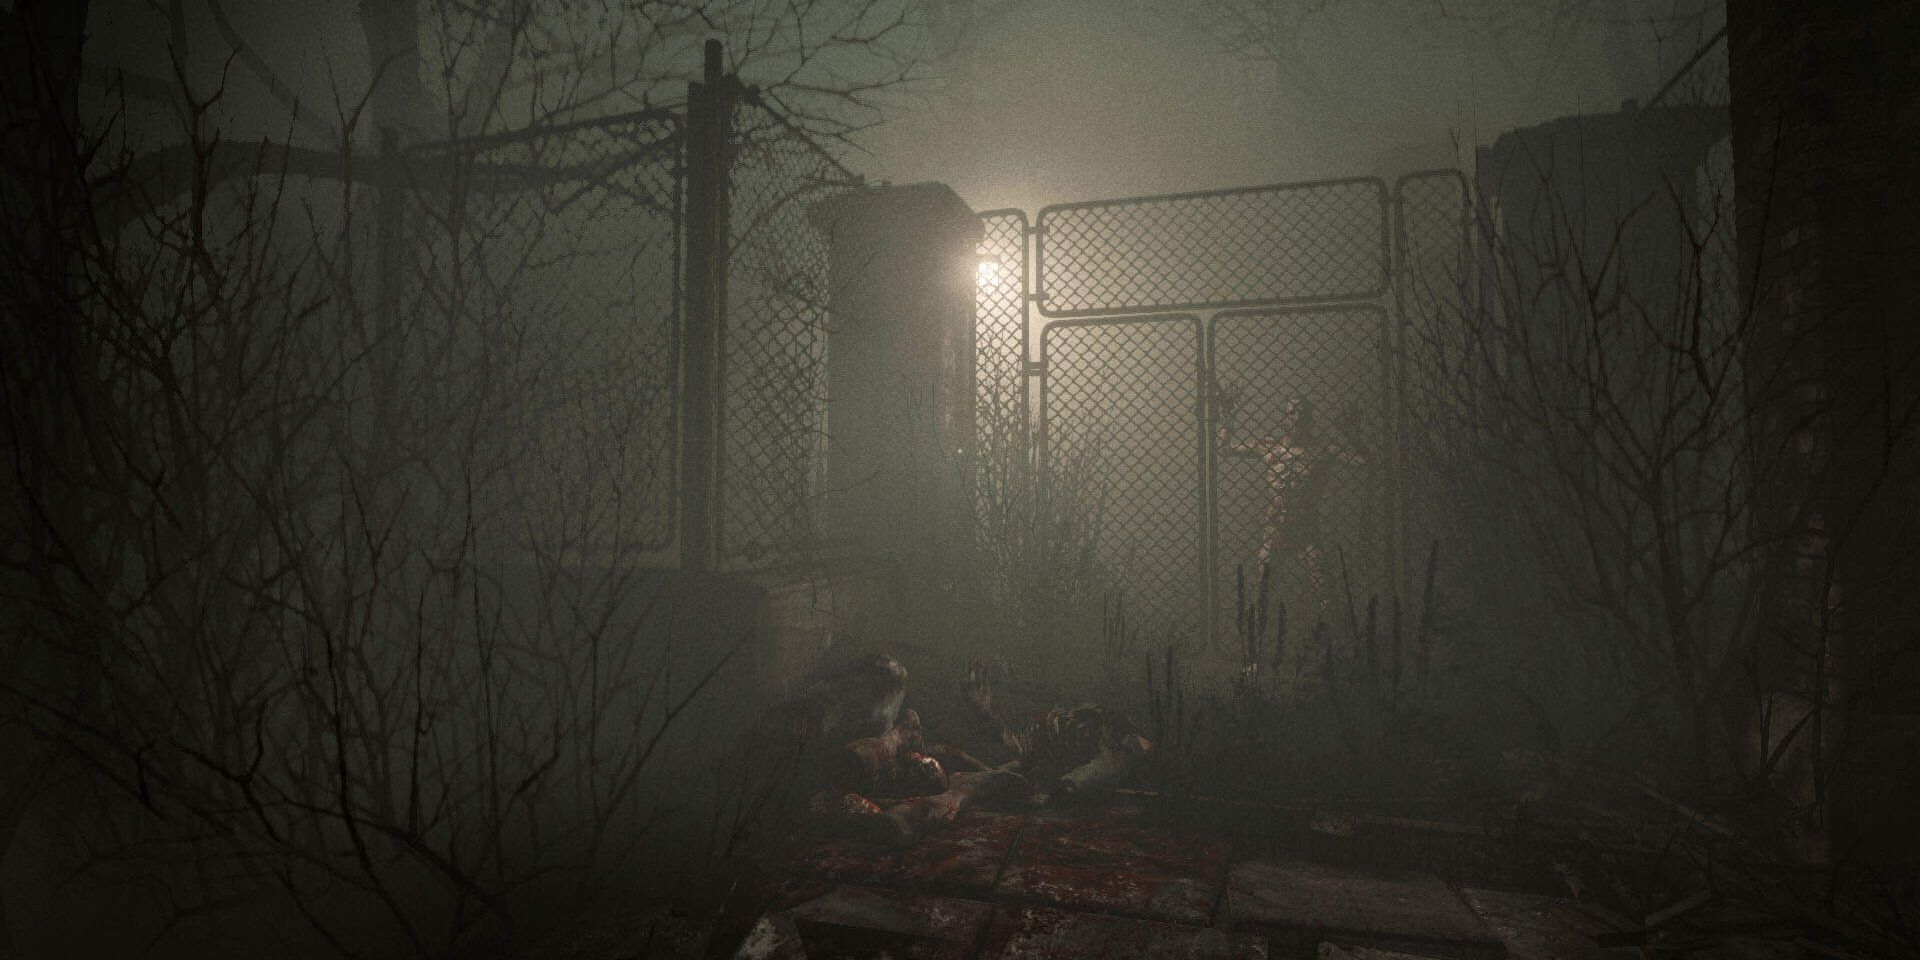 Rick Trager in Outlast attempting to get through a locked gate on a foggy night